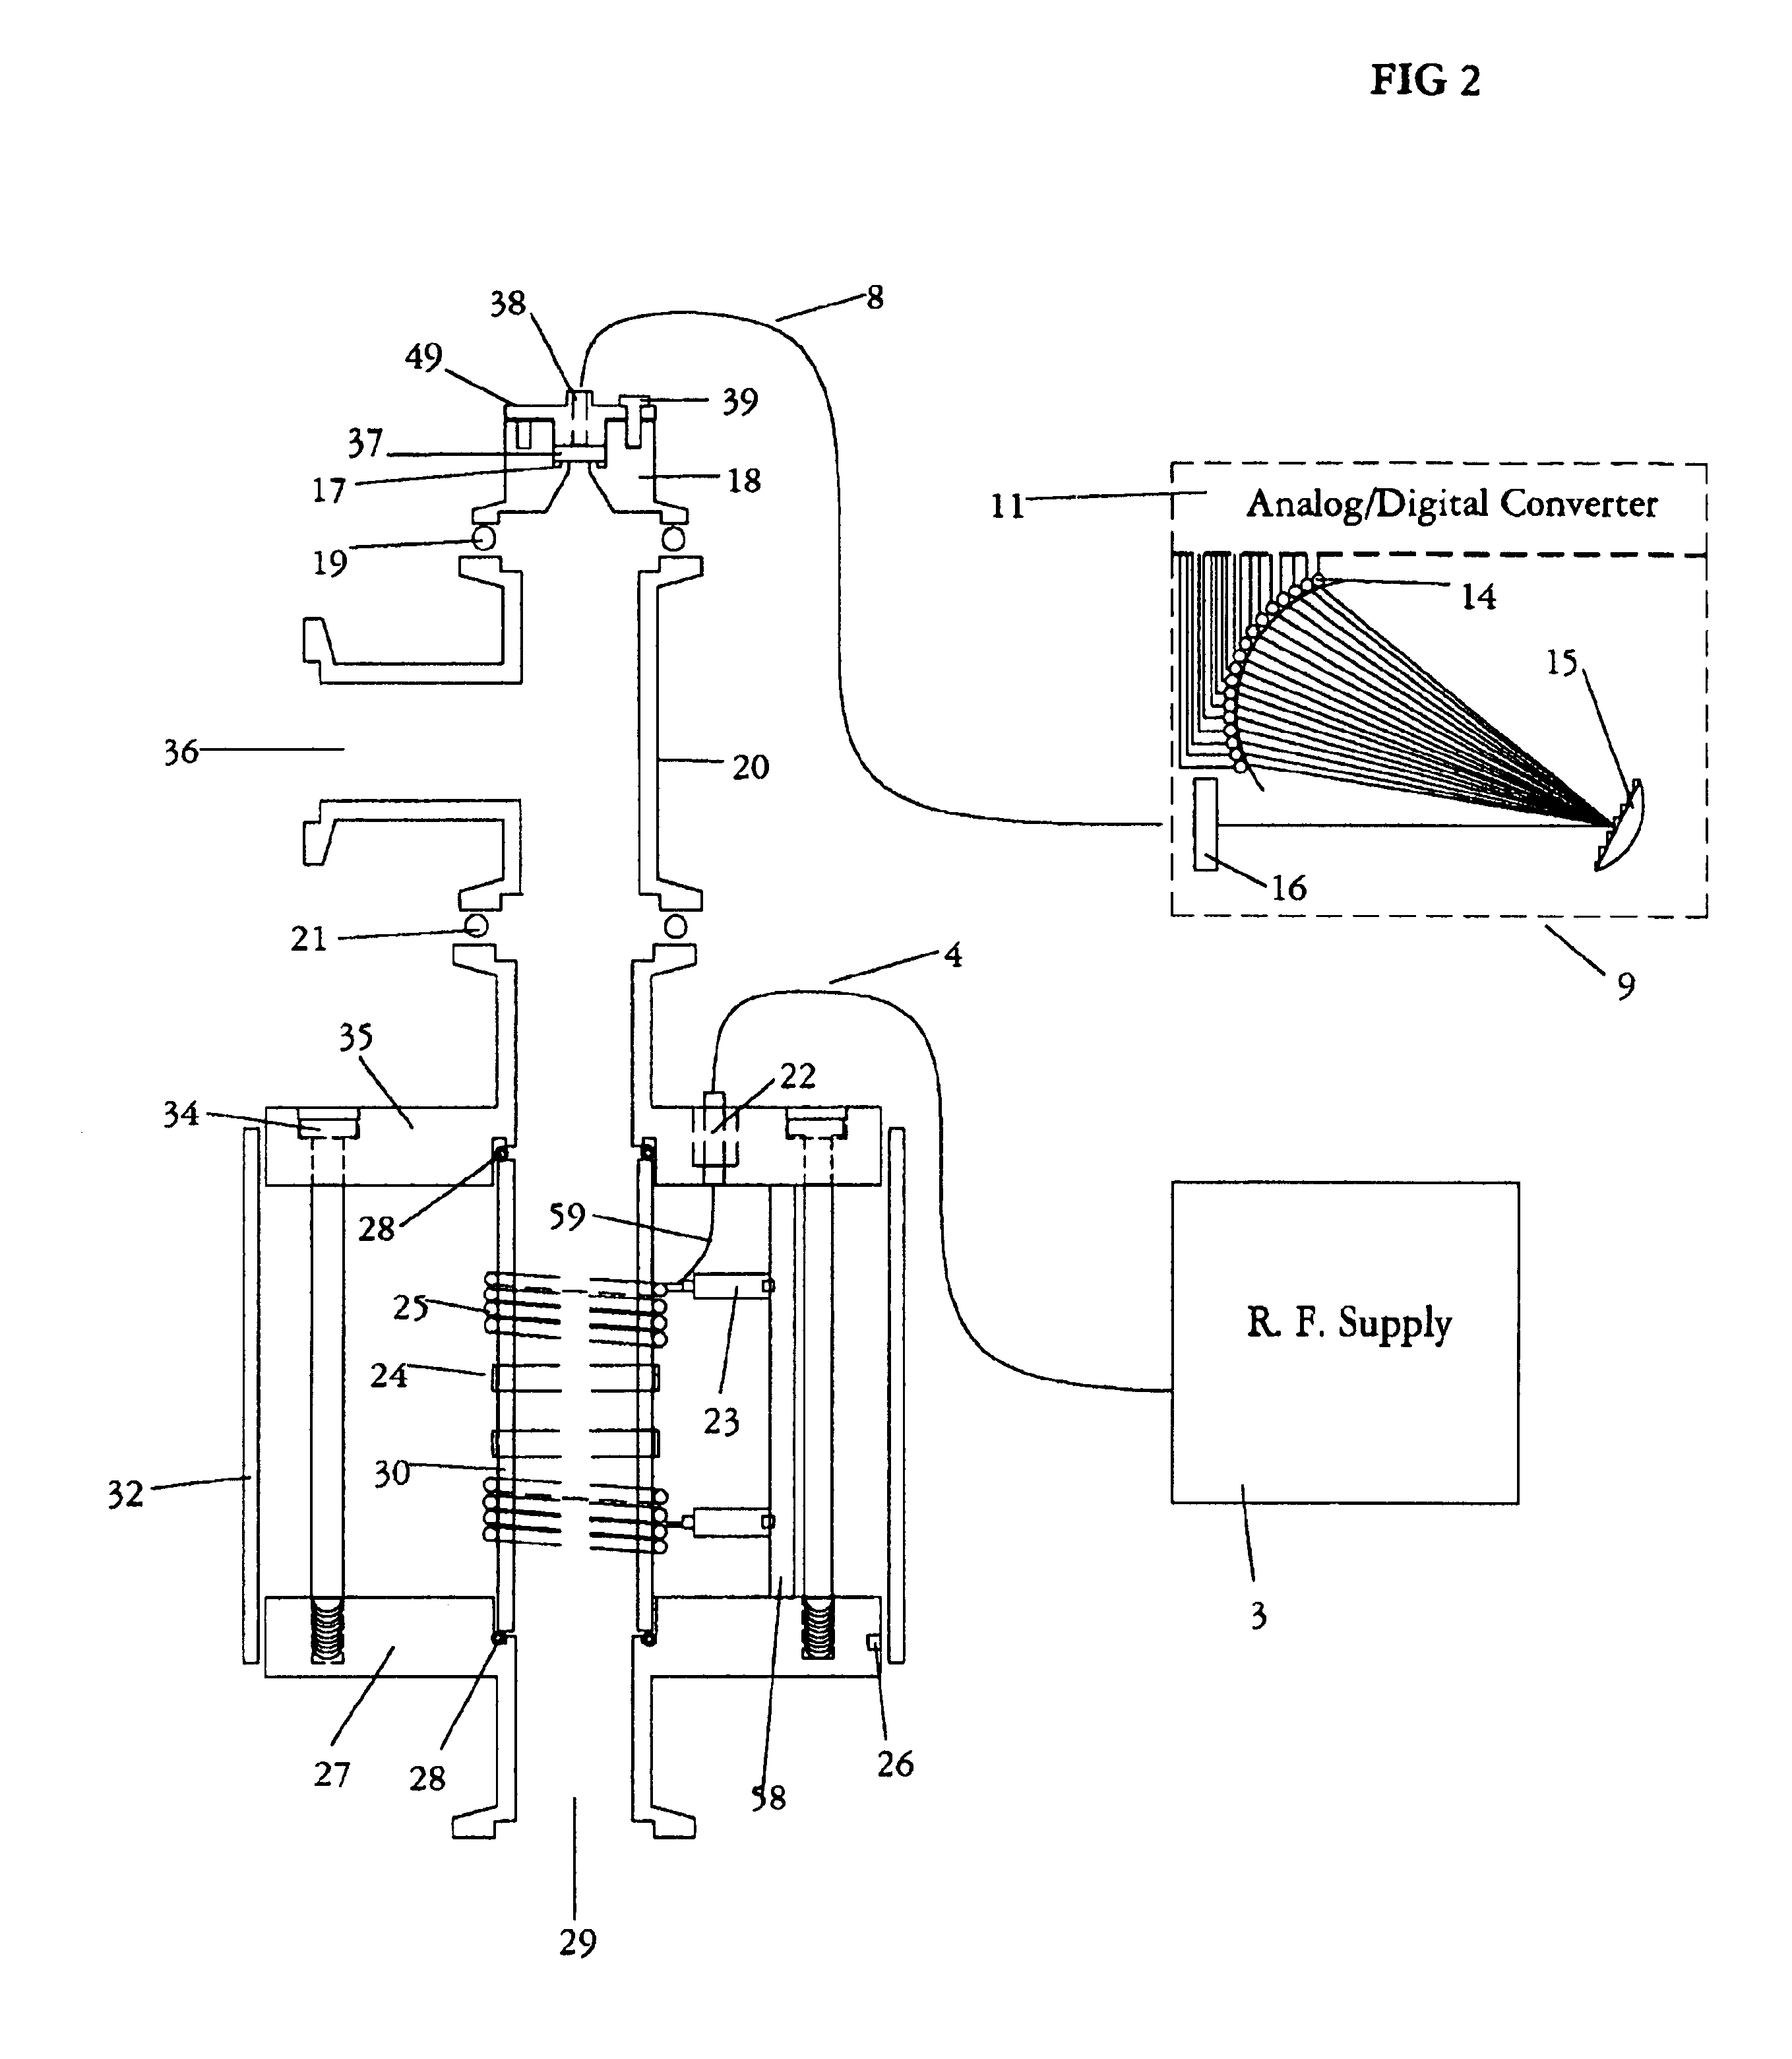 Inductively coupled plasma spectrometer for process diagnostics and control